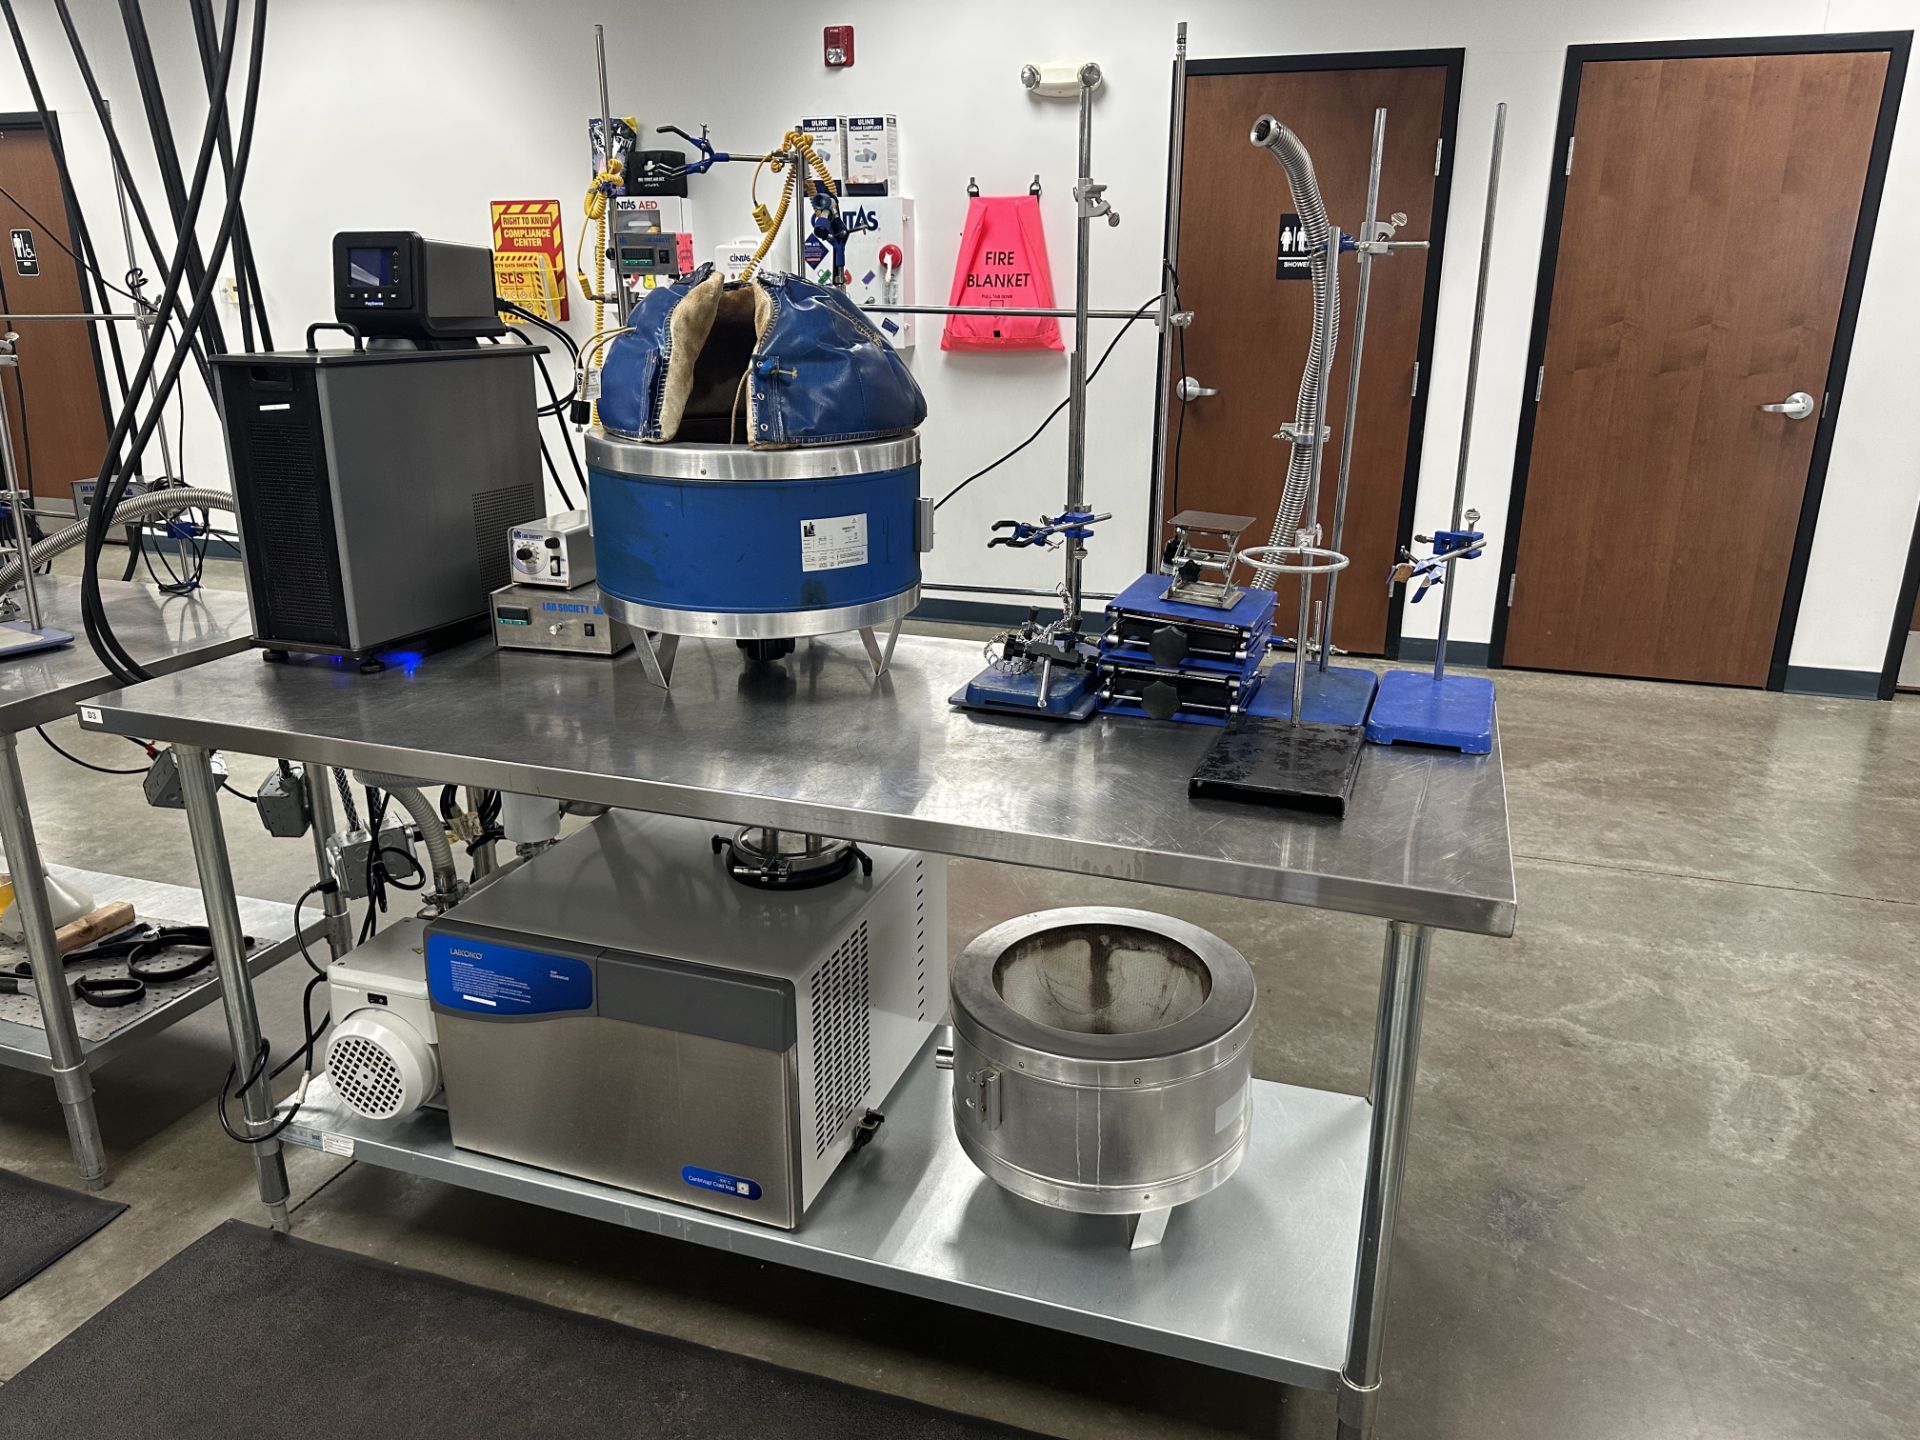 Used Lab Society 20L Short Path System. Full Bore w/ Labconco Cold Trap, Welch Vacuum Pump & More